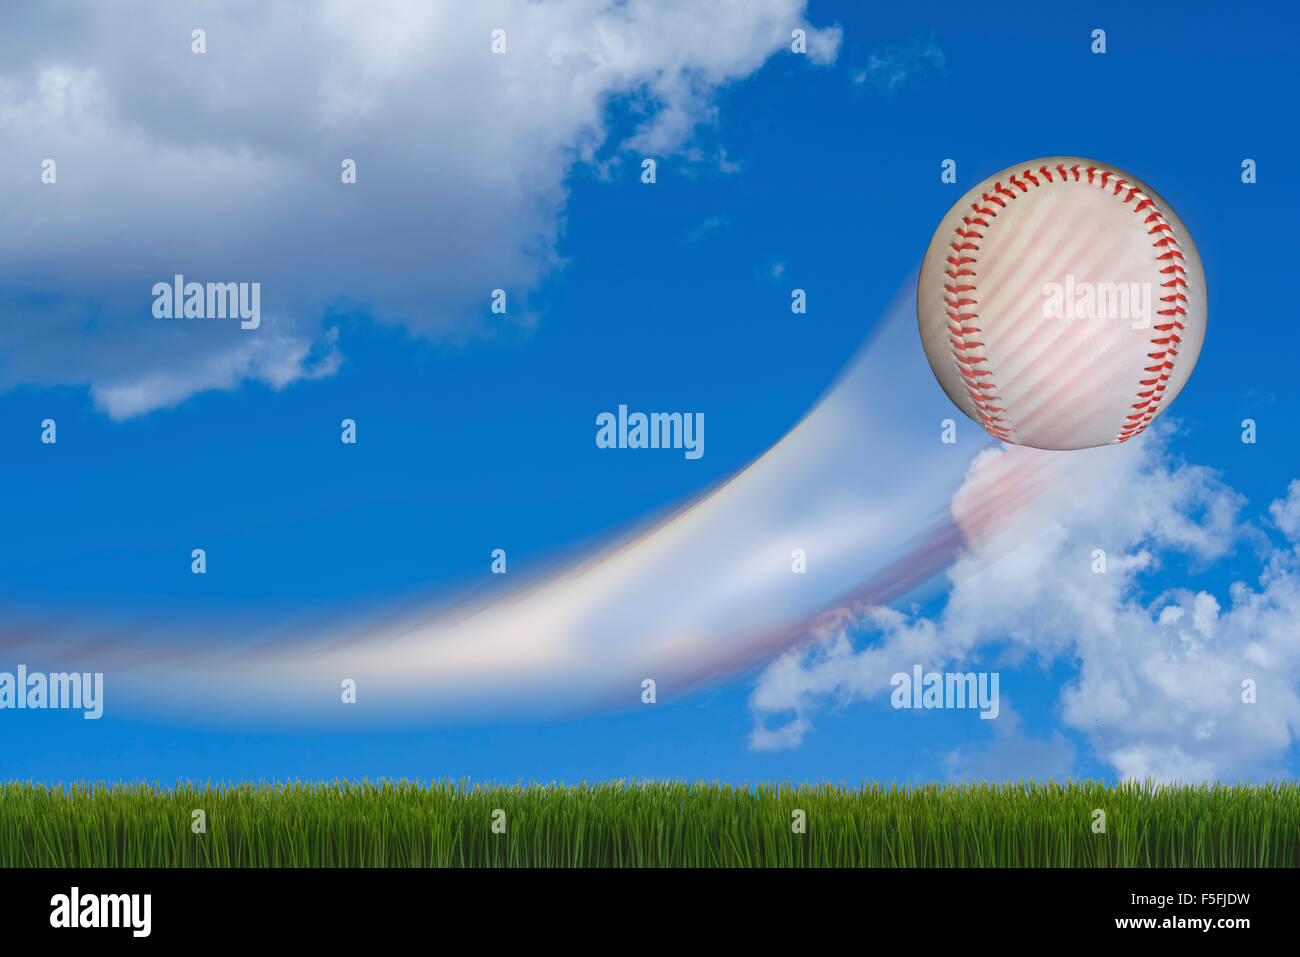 Fast baseball going through the air with room for your type. Stock Photo